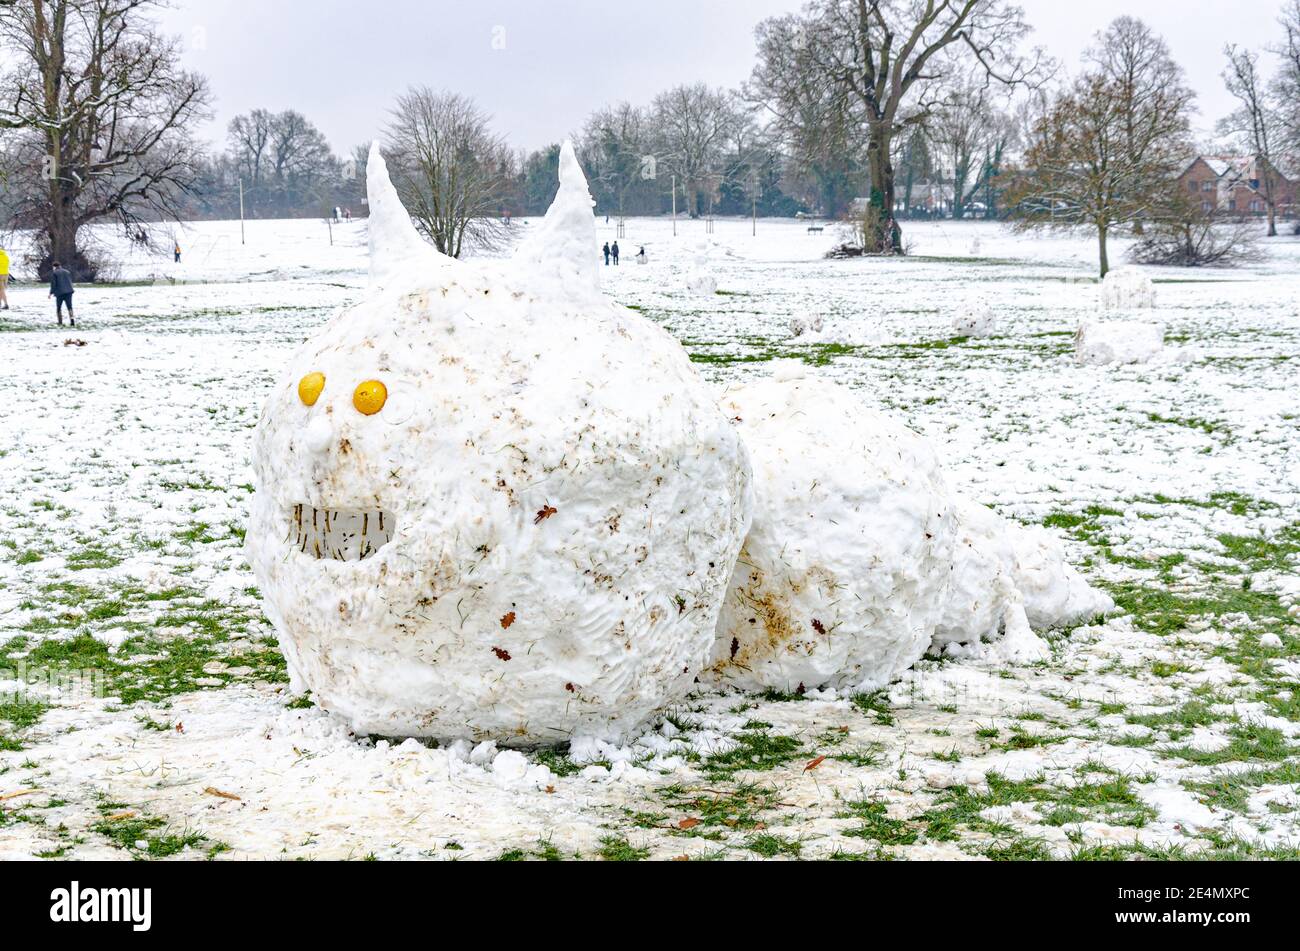 A large caterpillar like creature sculpted out of snow in Prospect Park, Reading, UK in the middle of winte Stock Photo